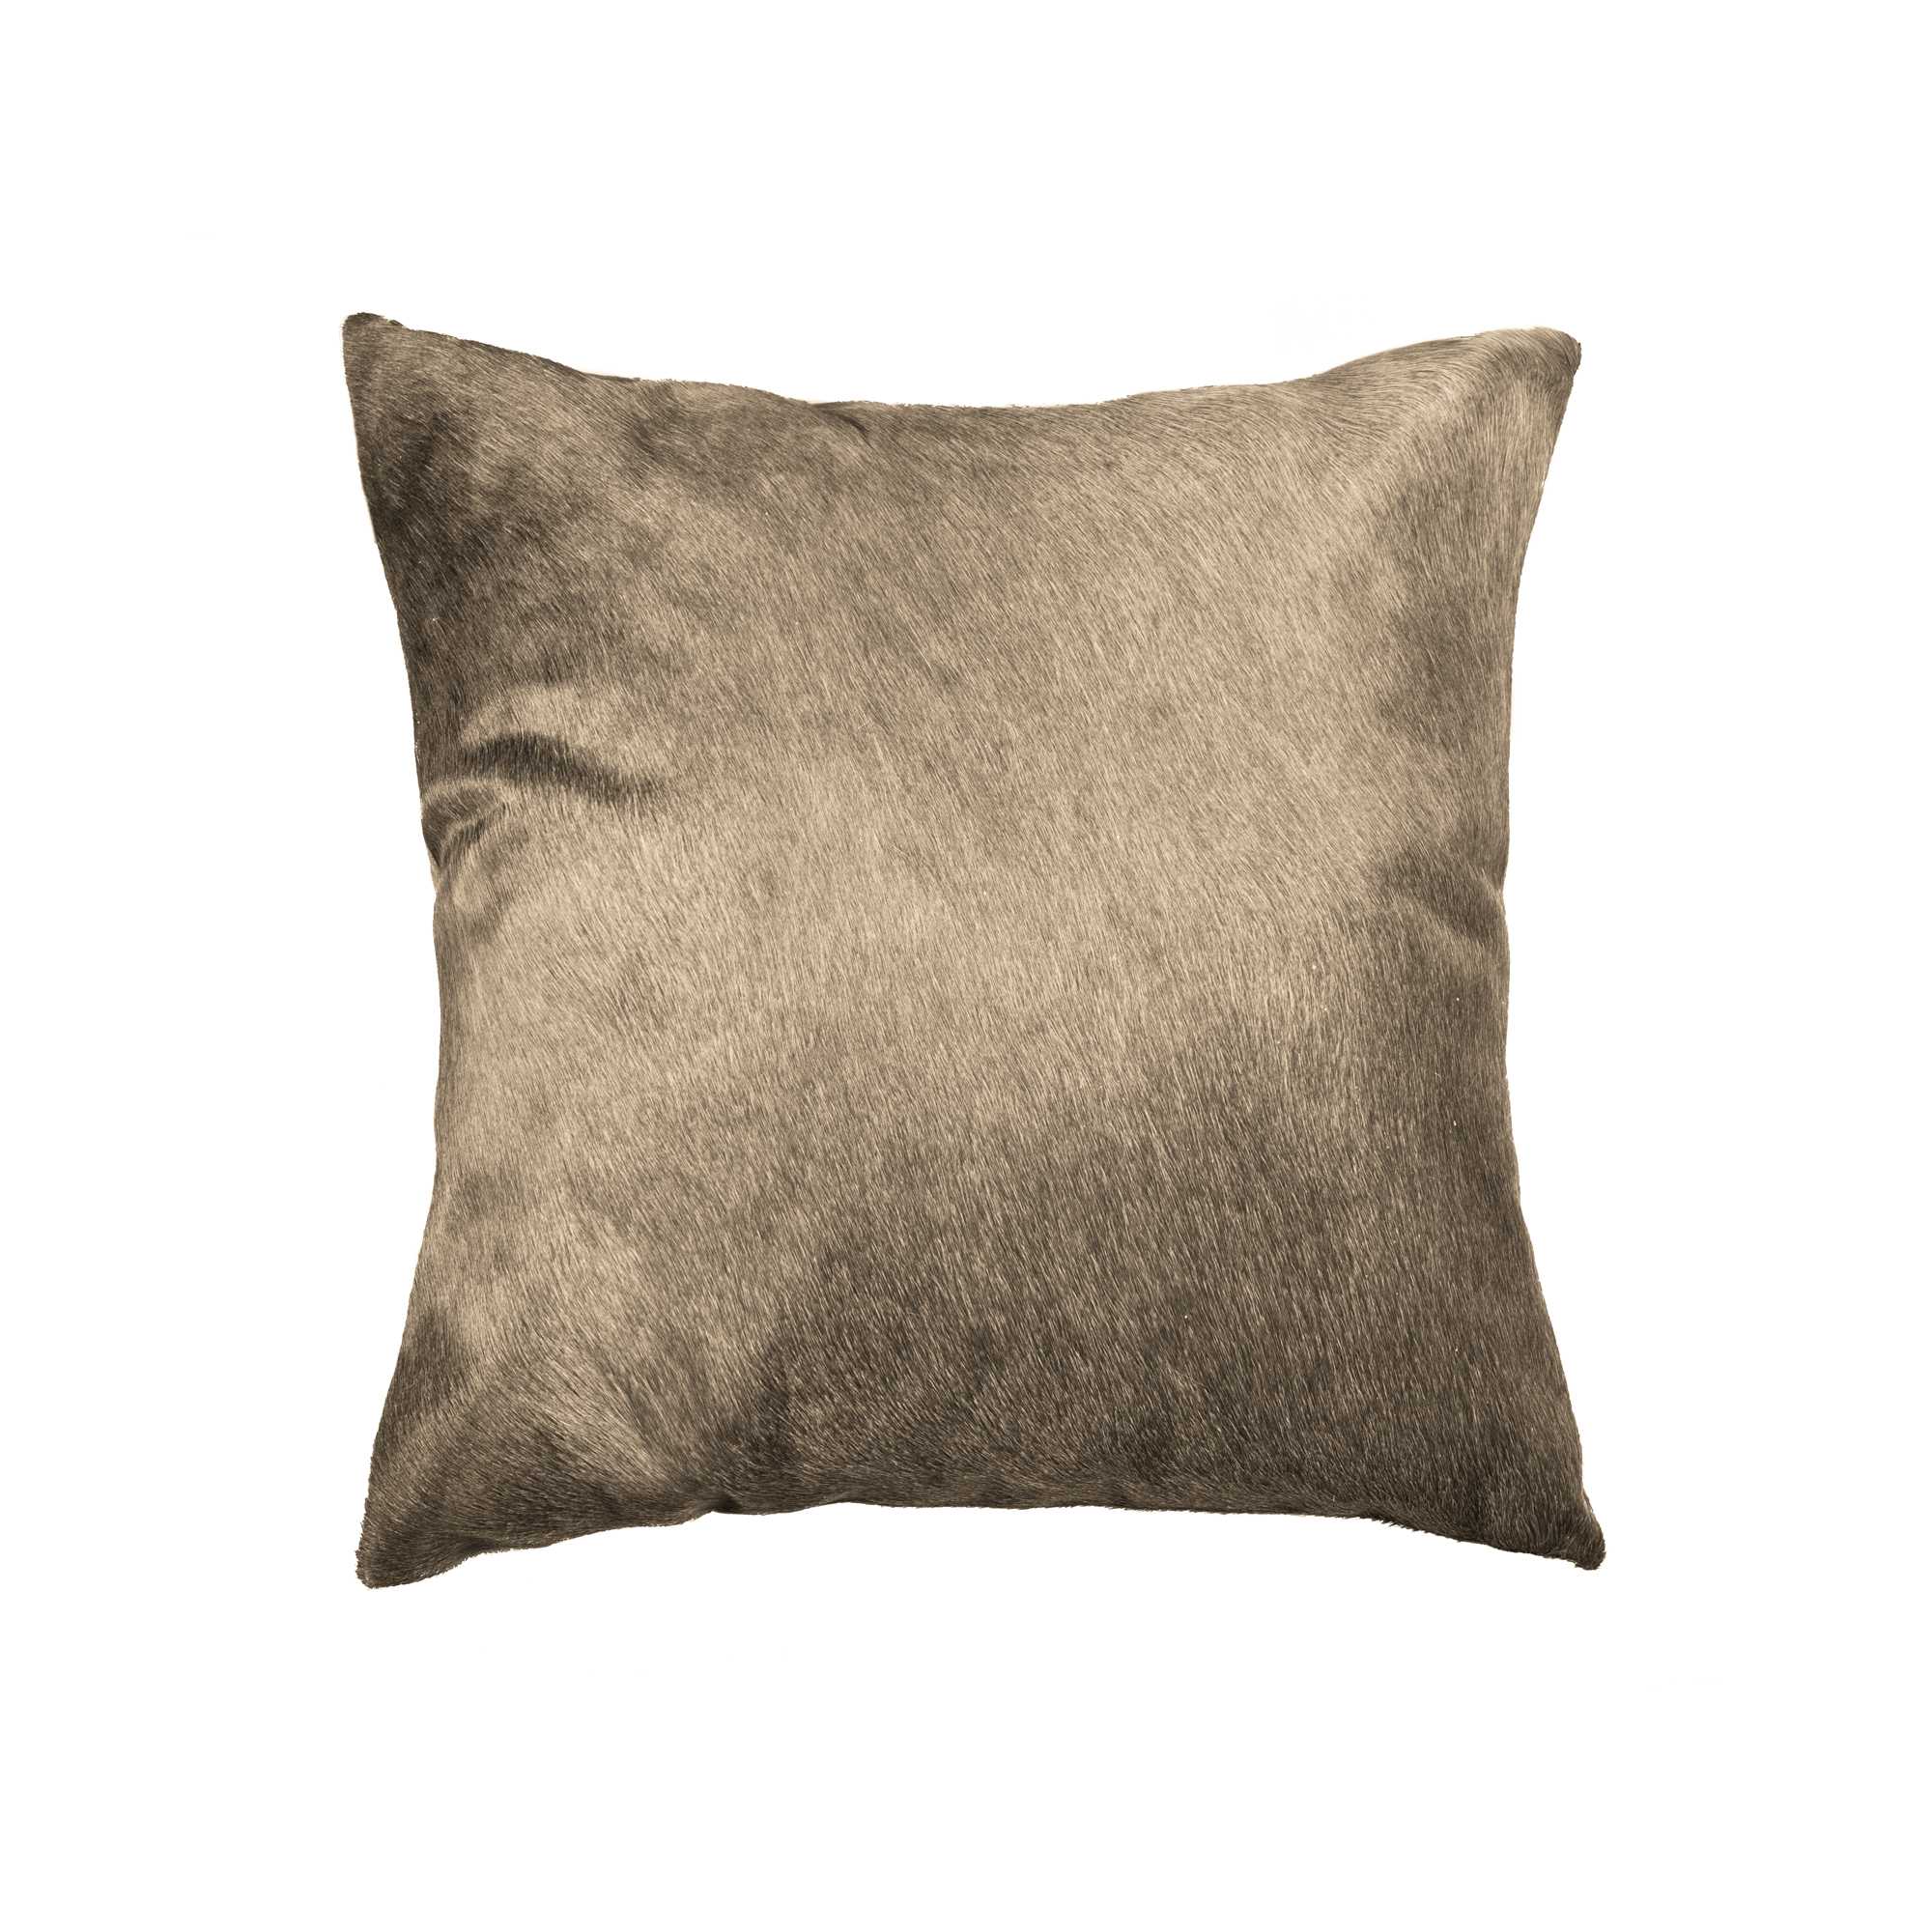 18" x 18" x 5" Smooth Taupe Kobe Cowhide - Pillow